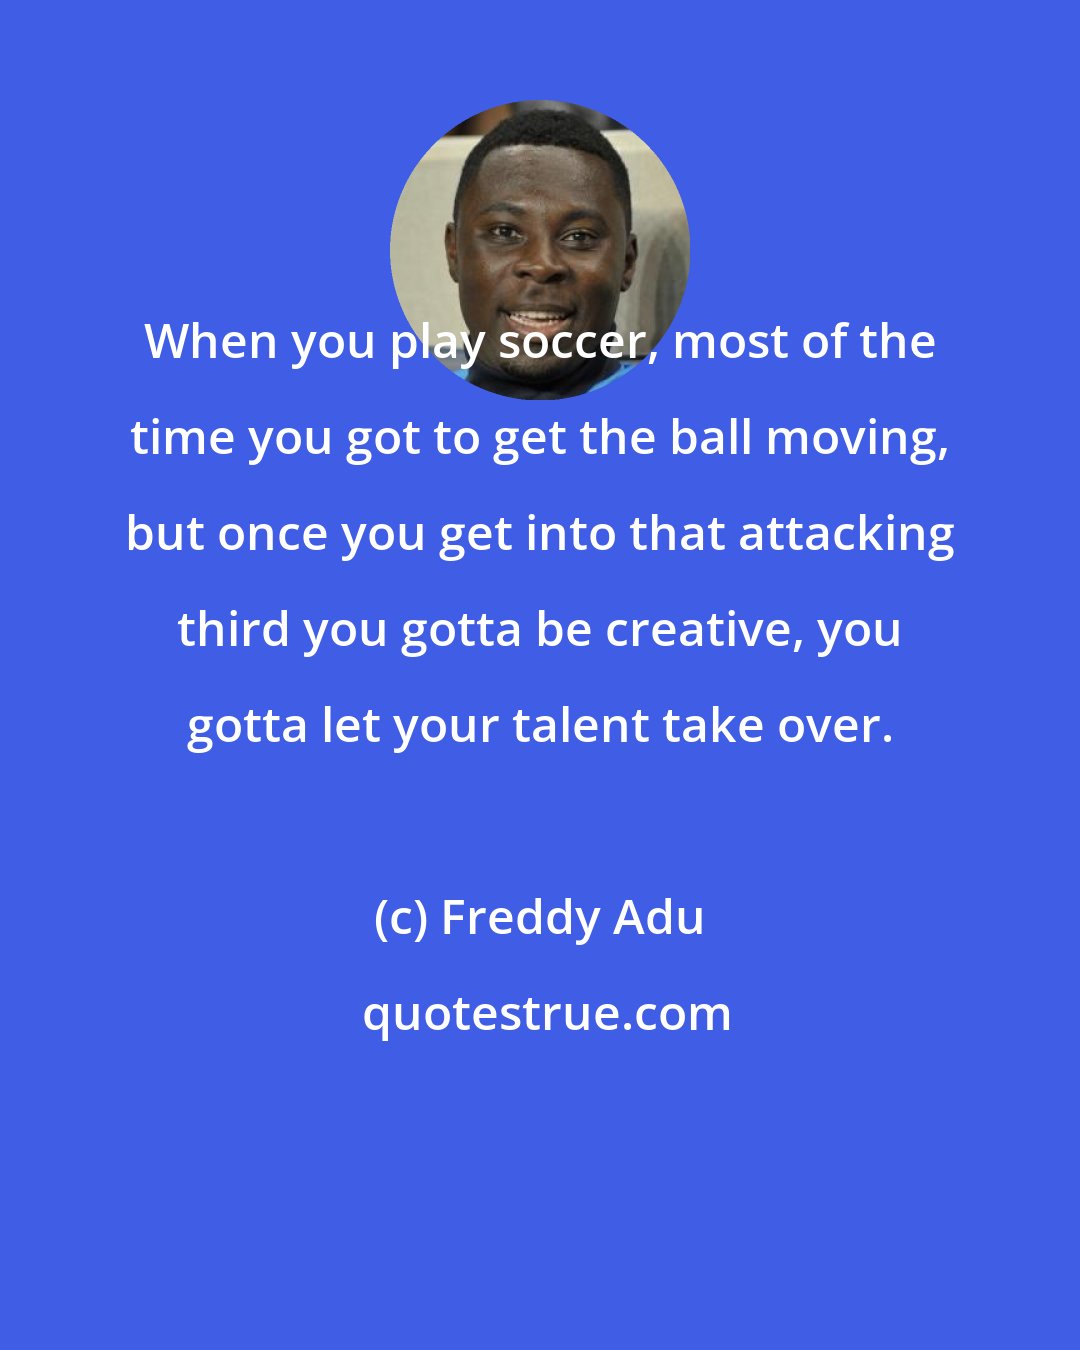 Freddy Adu: When you play soccer, most of the time you got to get the ball moving, but once you get into that attacking third you gotta be creative, you gotta let your talent take over.